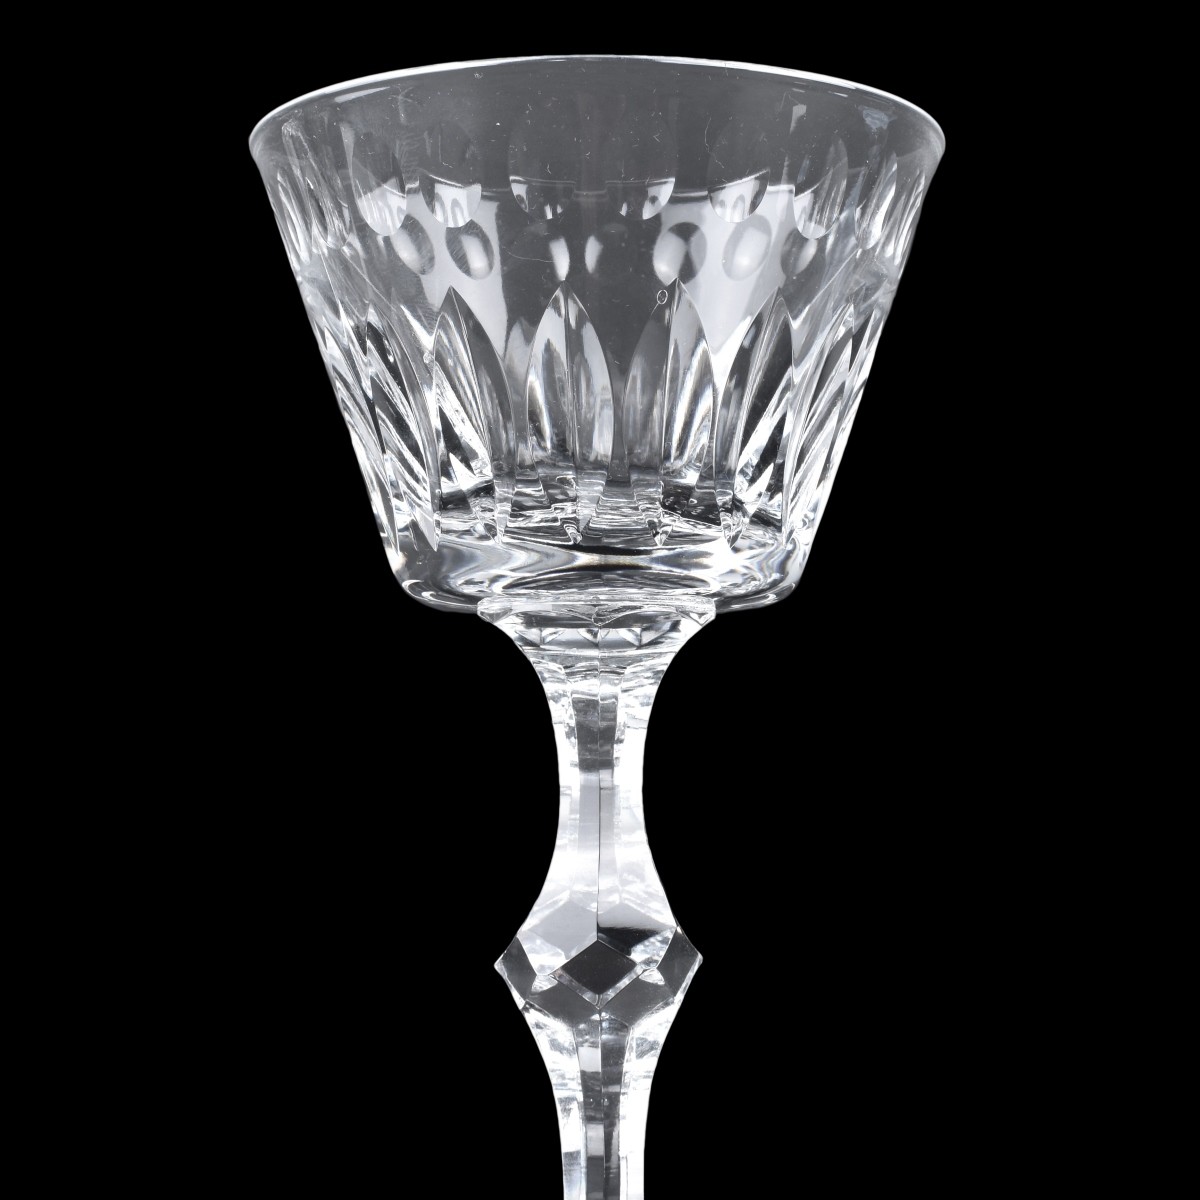 Hawkes "St. George" Crystal Champagne/Sherbets